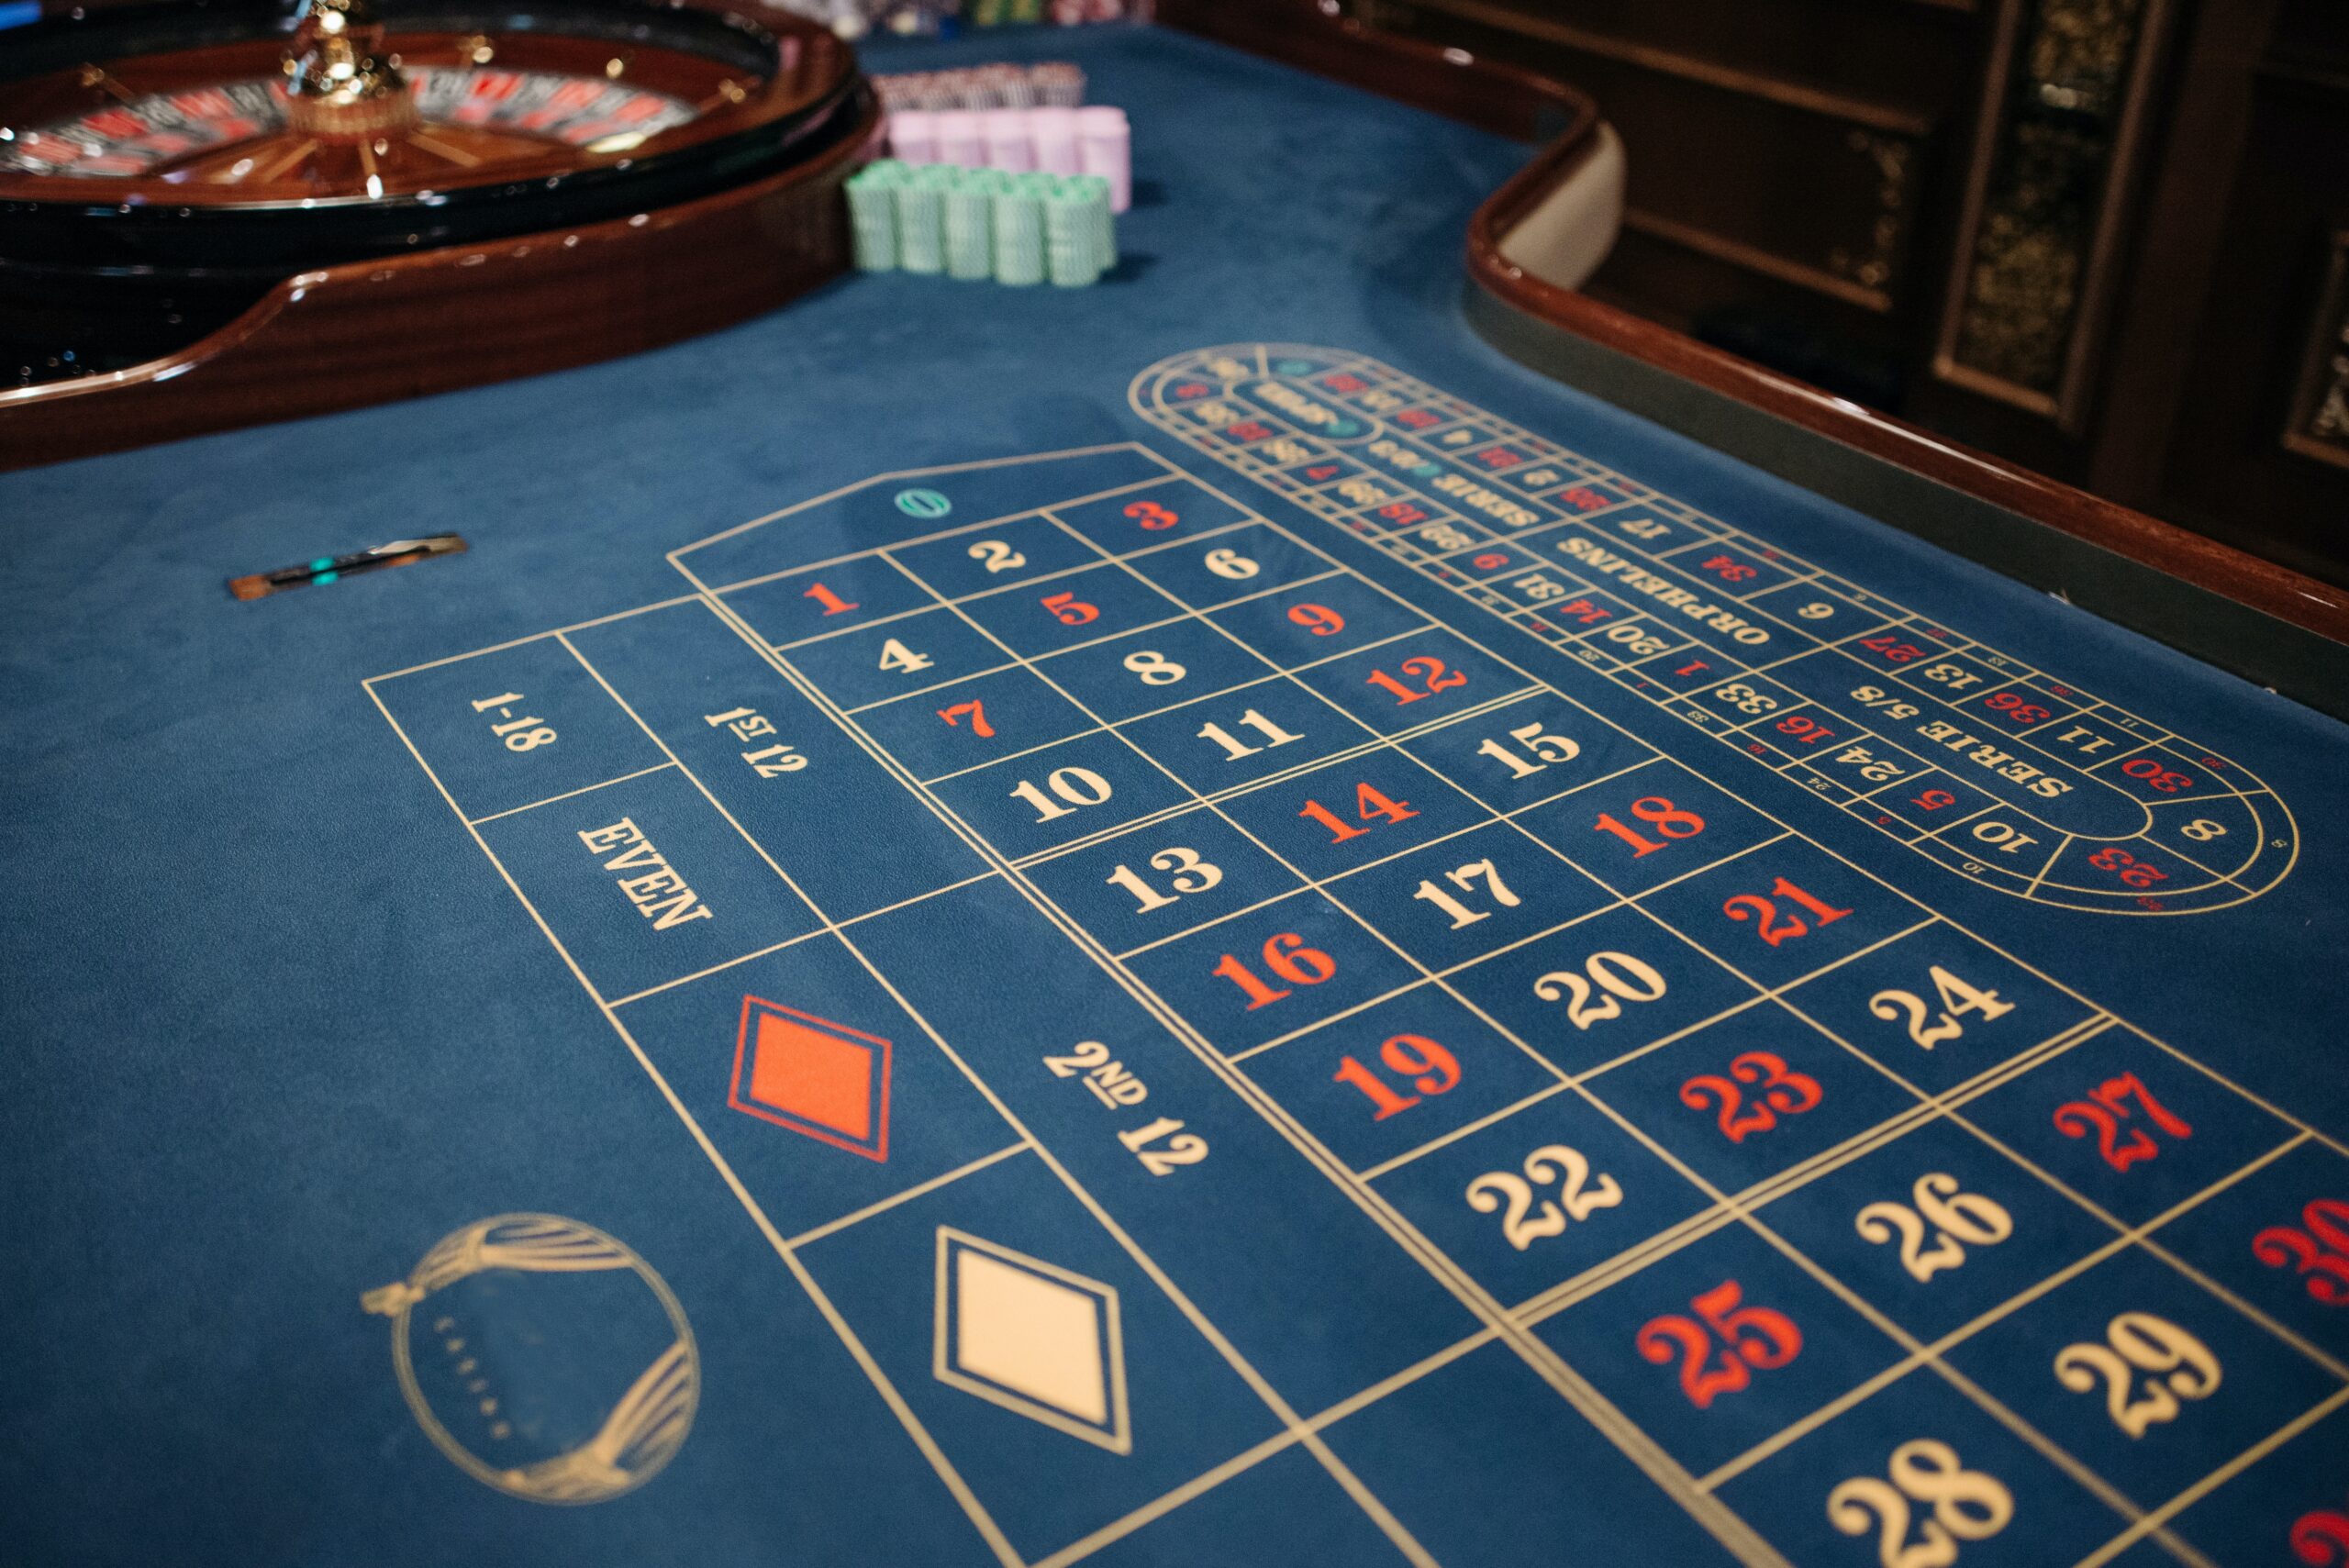 The Art of Choosing: How to Select the Perfect Online Casino for Your Preferences